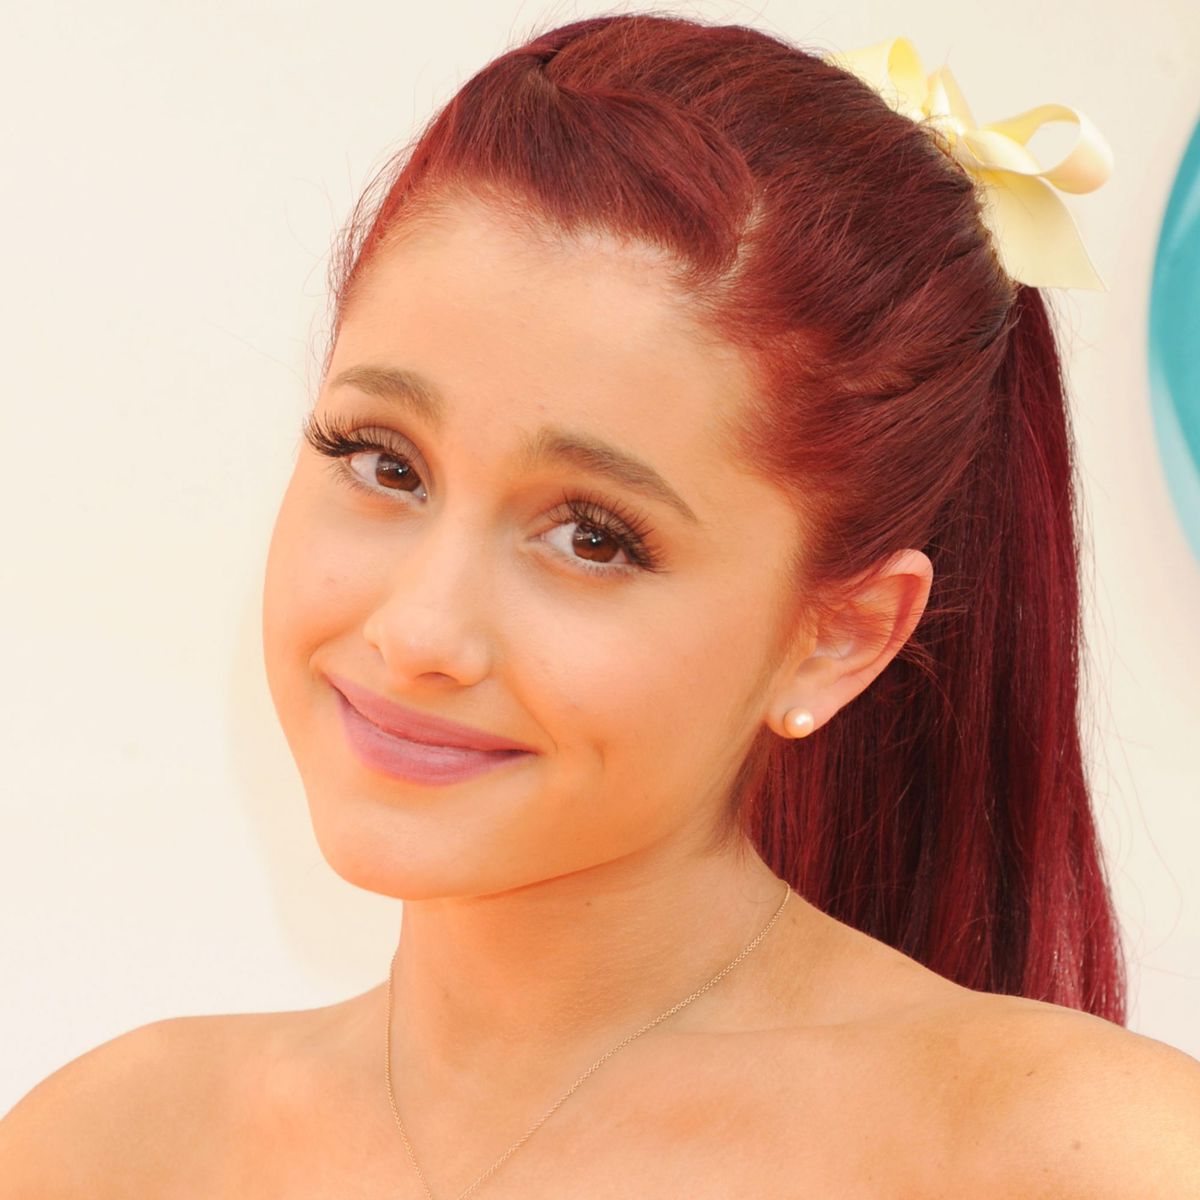 See More Than 30 Times Ariana Grande Changed Up Her Beauty Look | InStyle